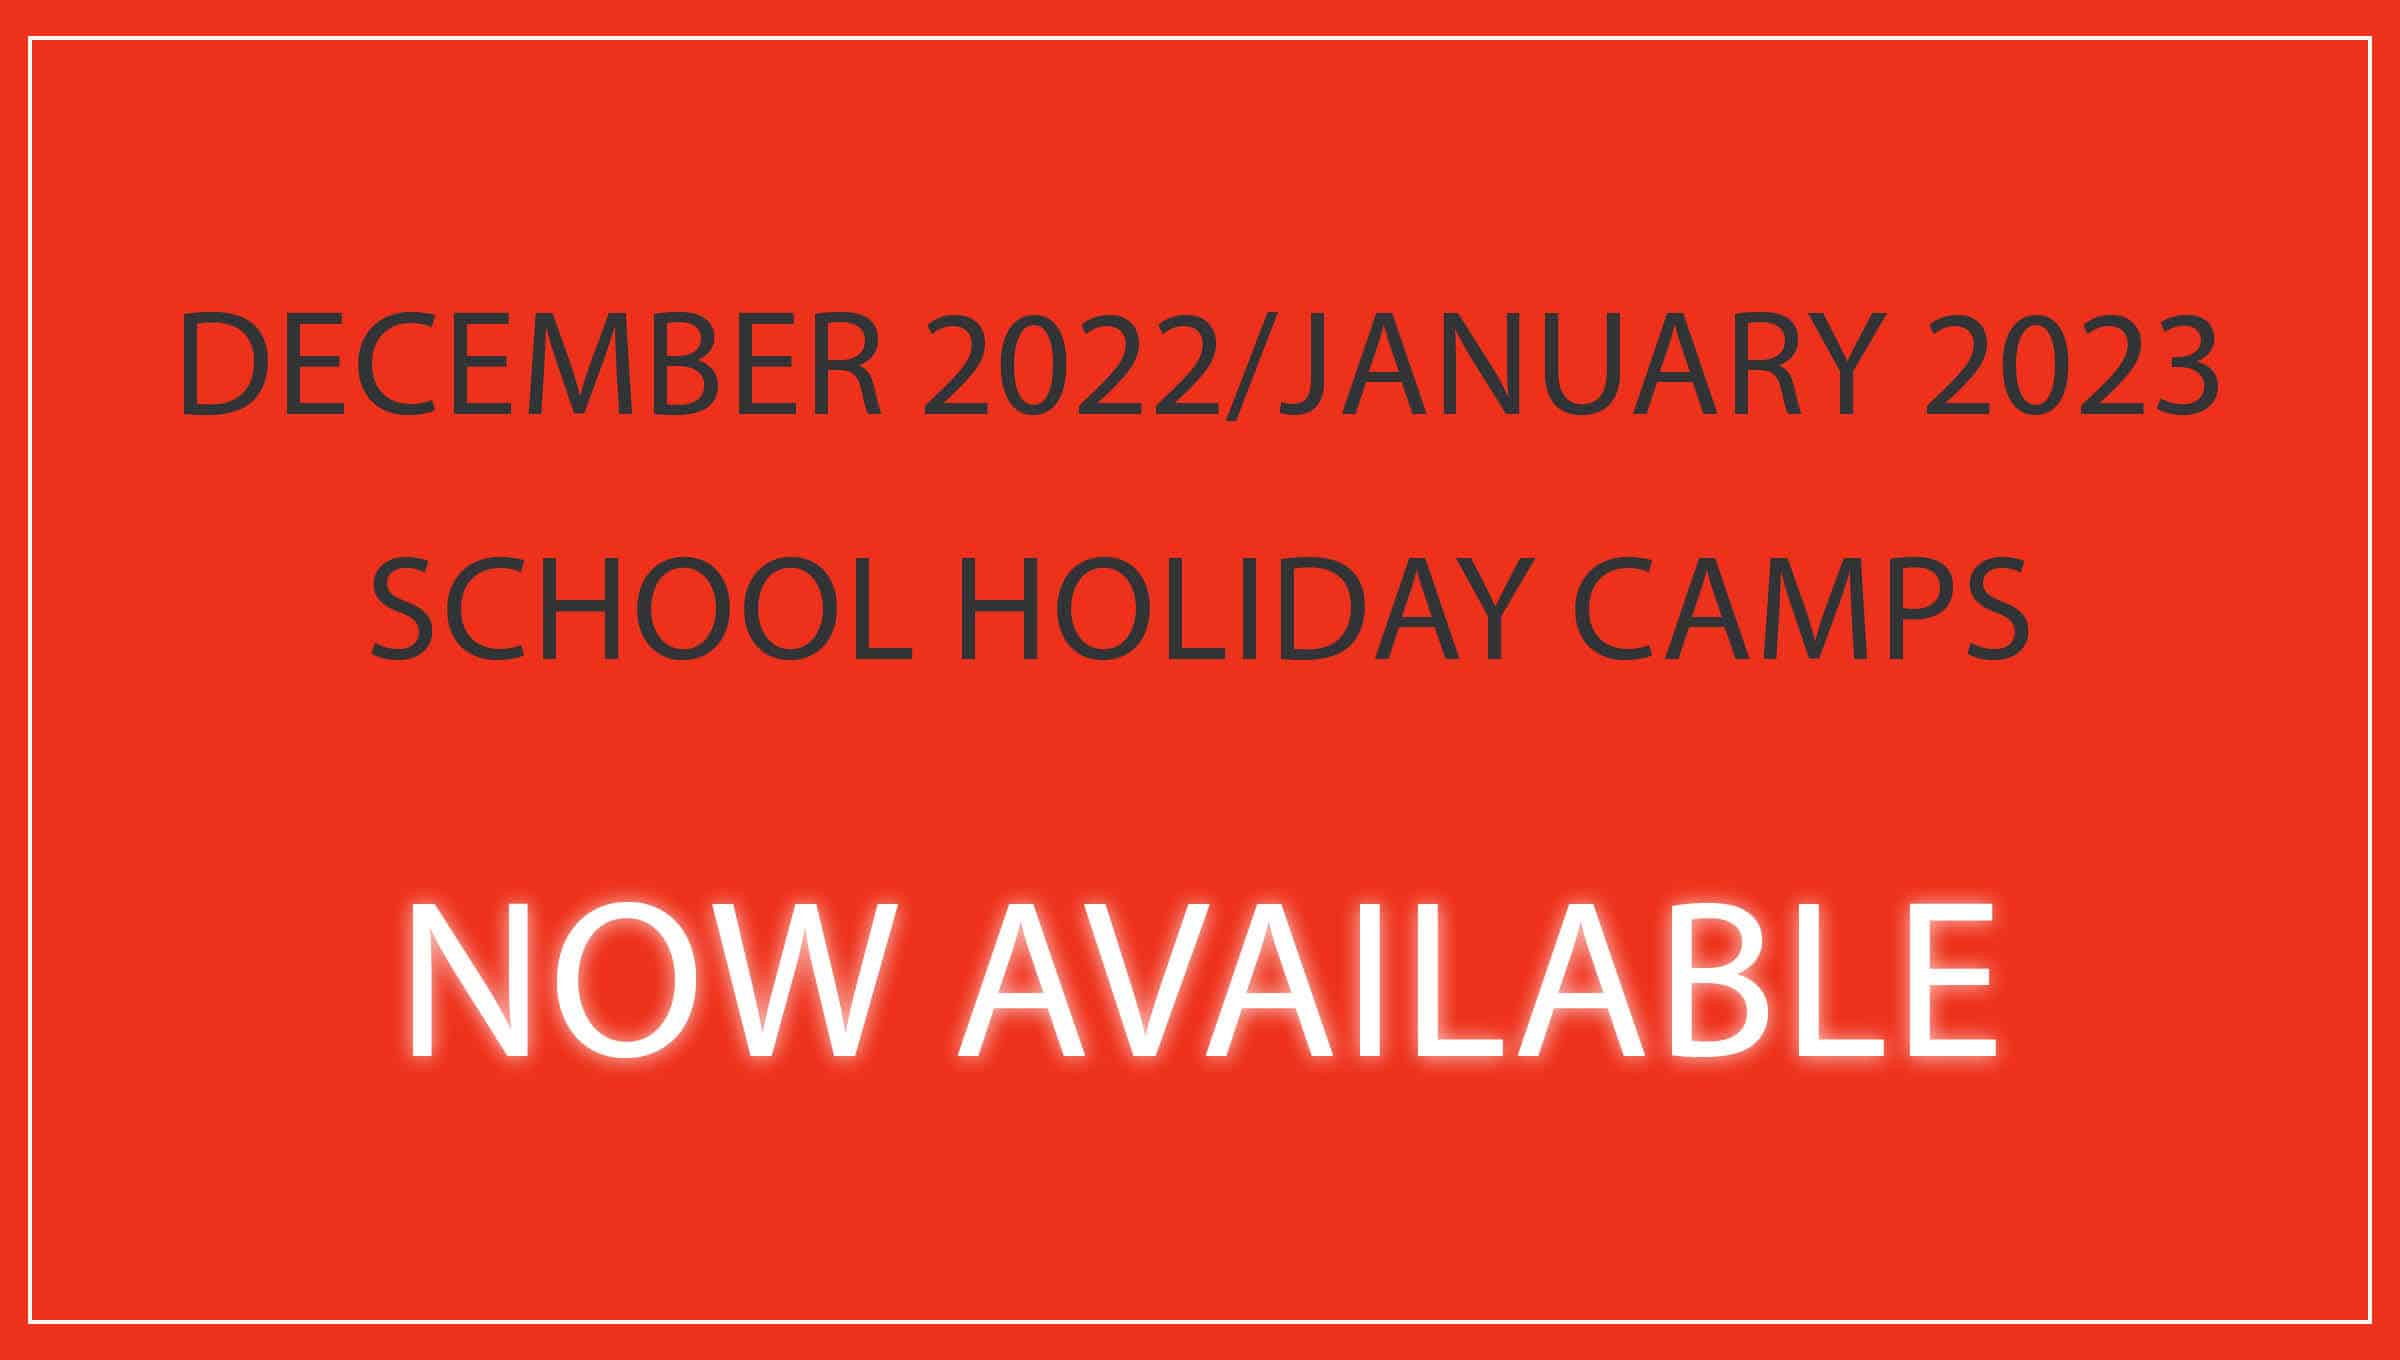 The King's School December 2022/January 2023 School Holiday Camps